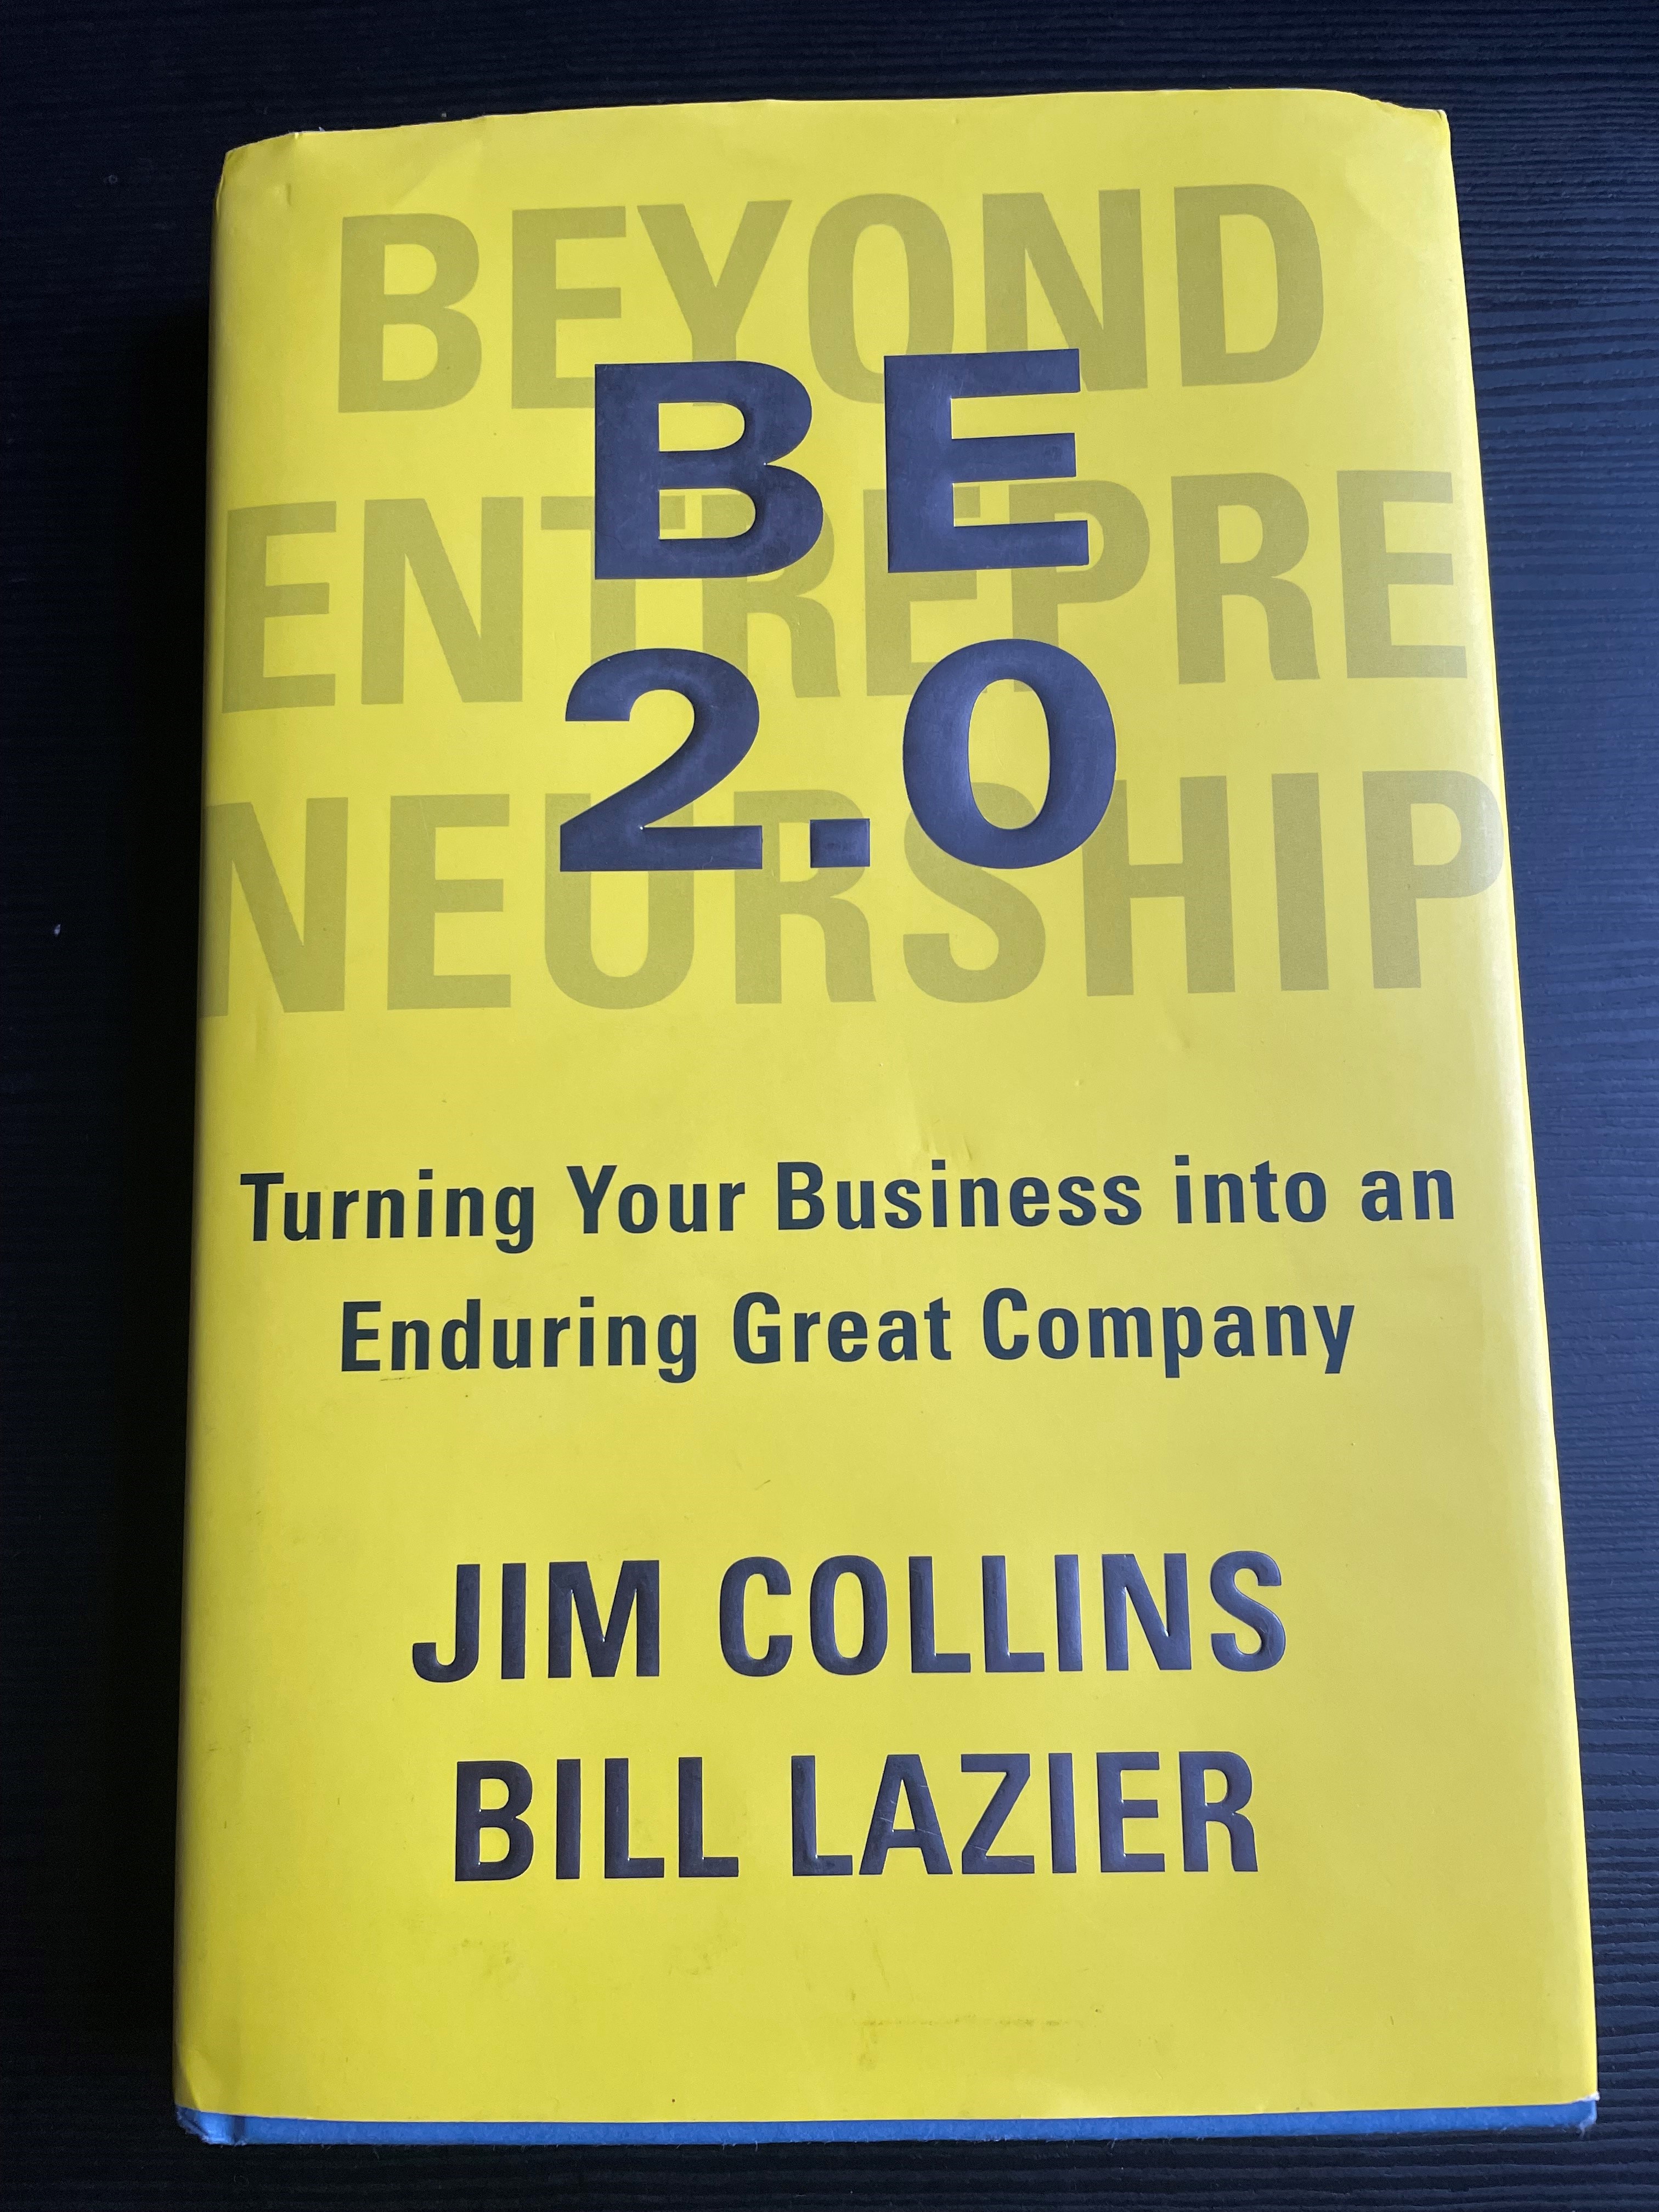 laurens van reijen on X: During last weeks #CIOnet event, I was asked what  book can you recommend for entrepreneurs? An inspiring book for  entrepreneurs is Beyond Entrepreneurship 2.0 by Jim Collins.